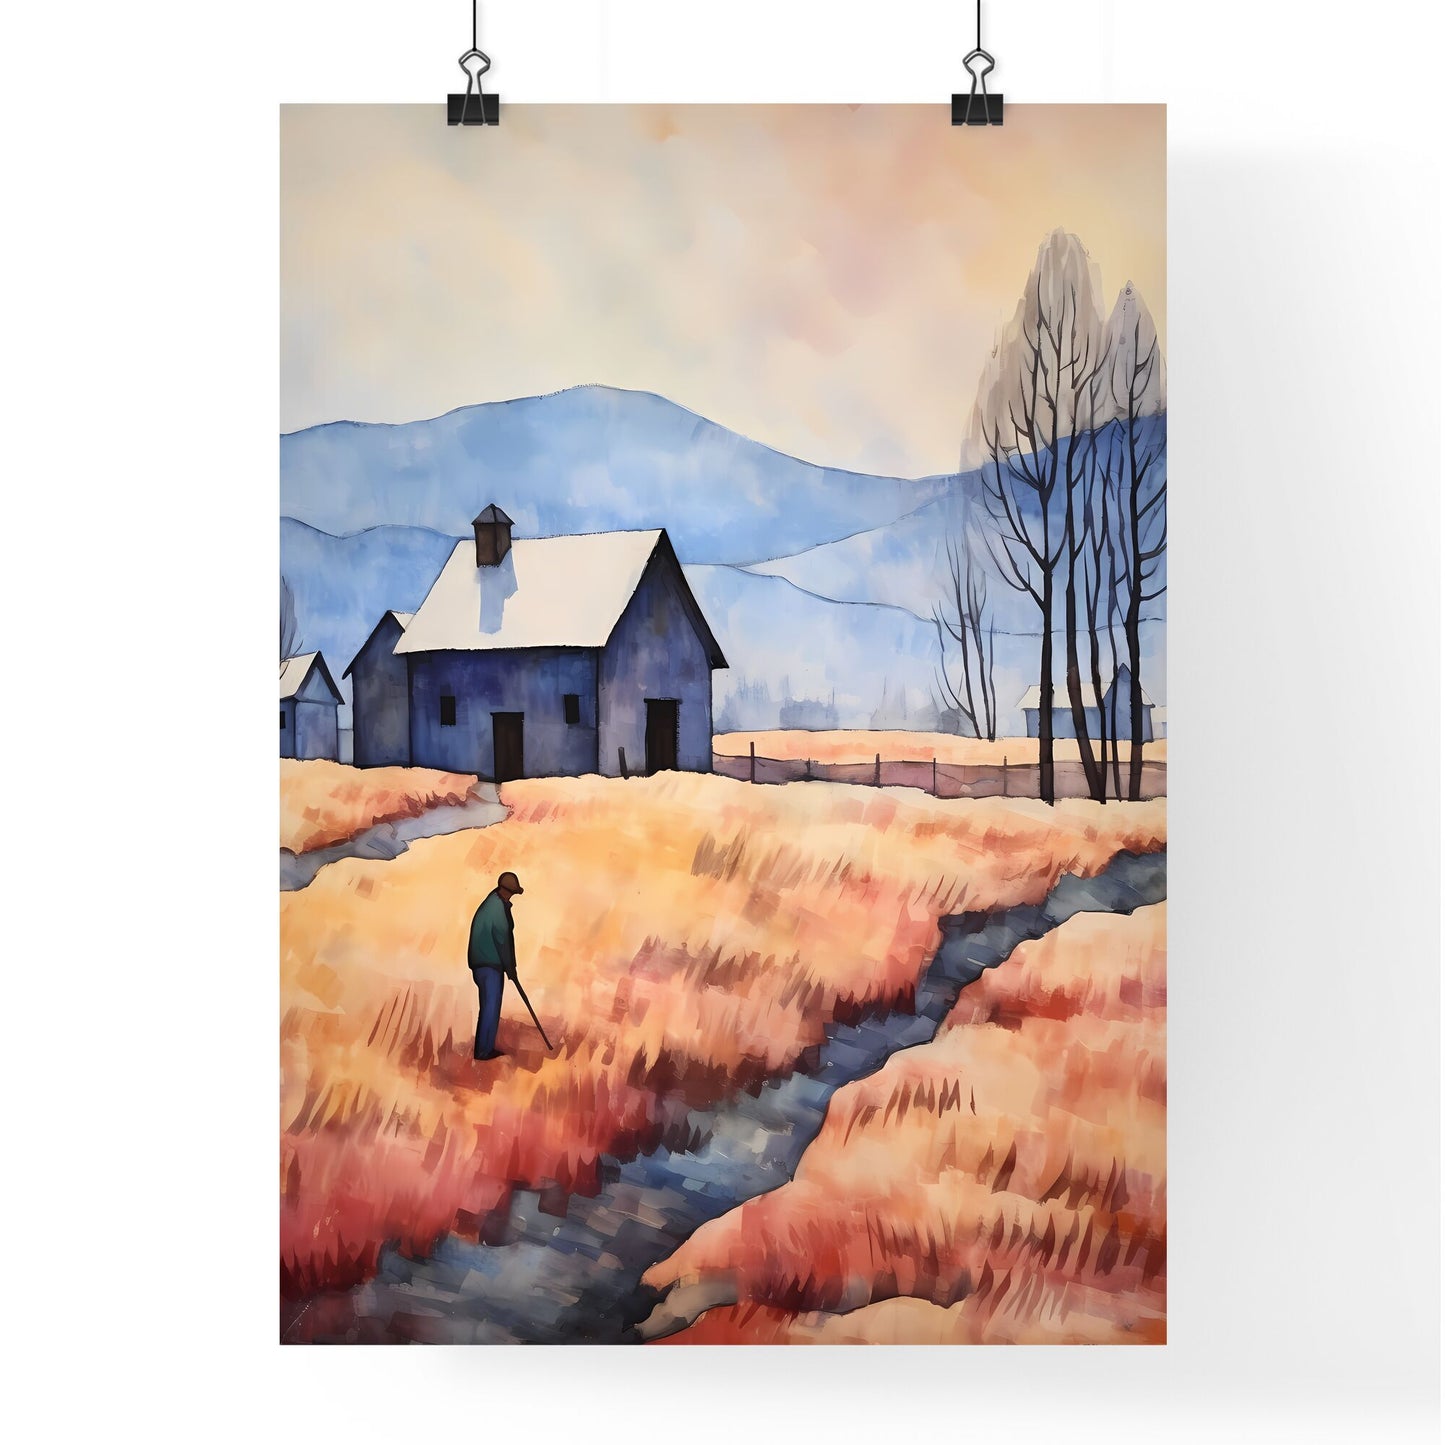 Watercolor Painting Of A Man Walking Through A Field With A House Art Print Default Title